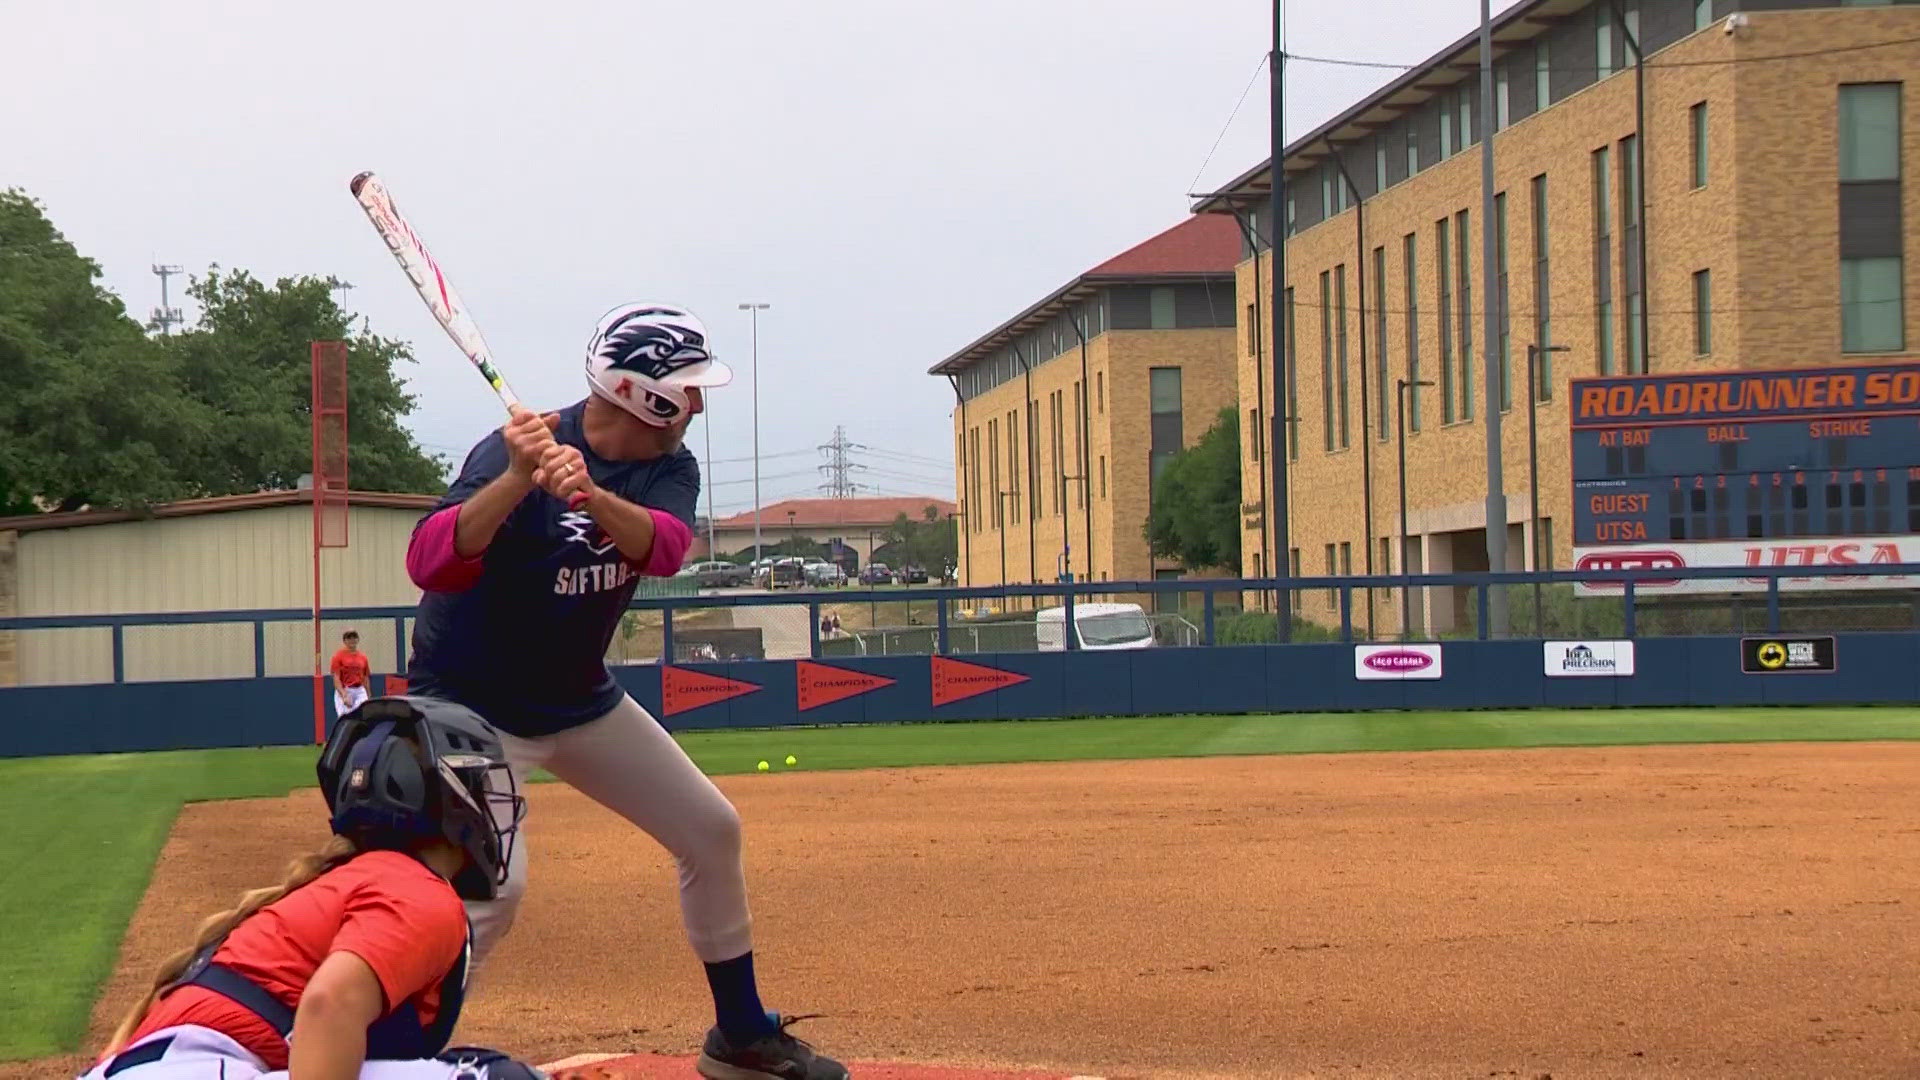 If you think softball is a recreational sport, try stepping up to the plate with the UTSA Roadrunners team!